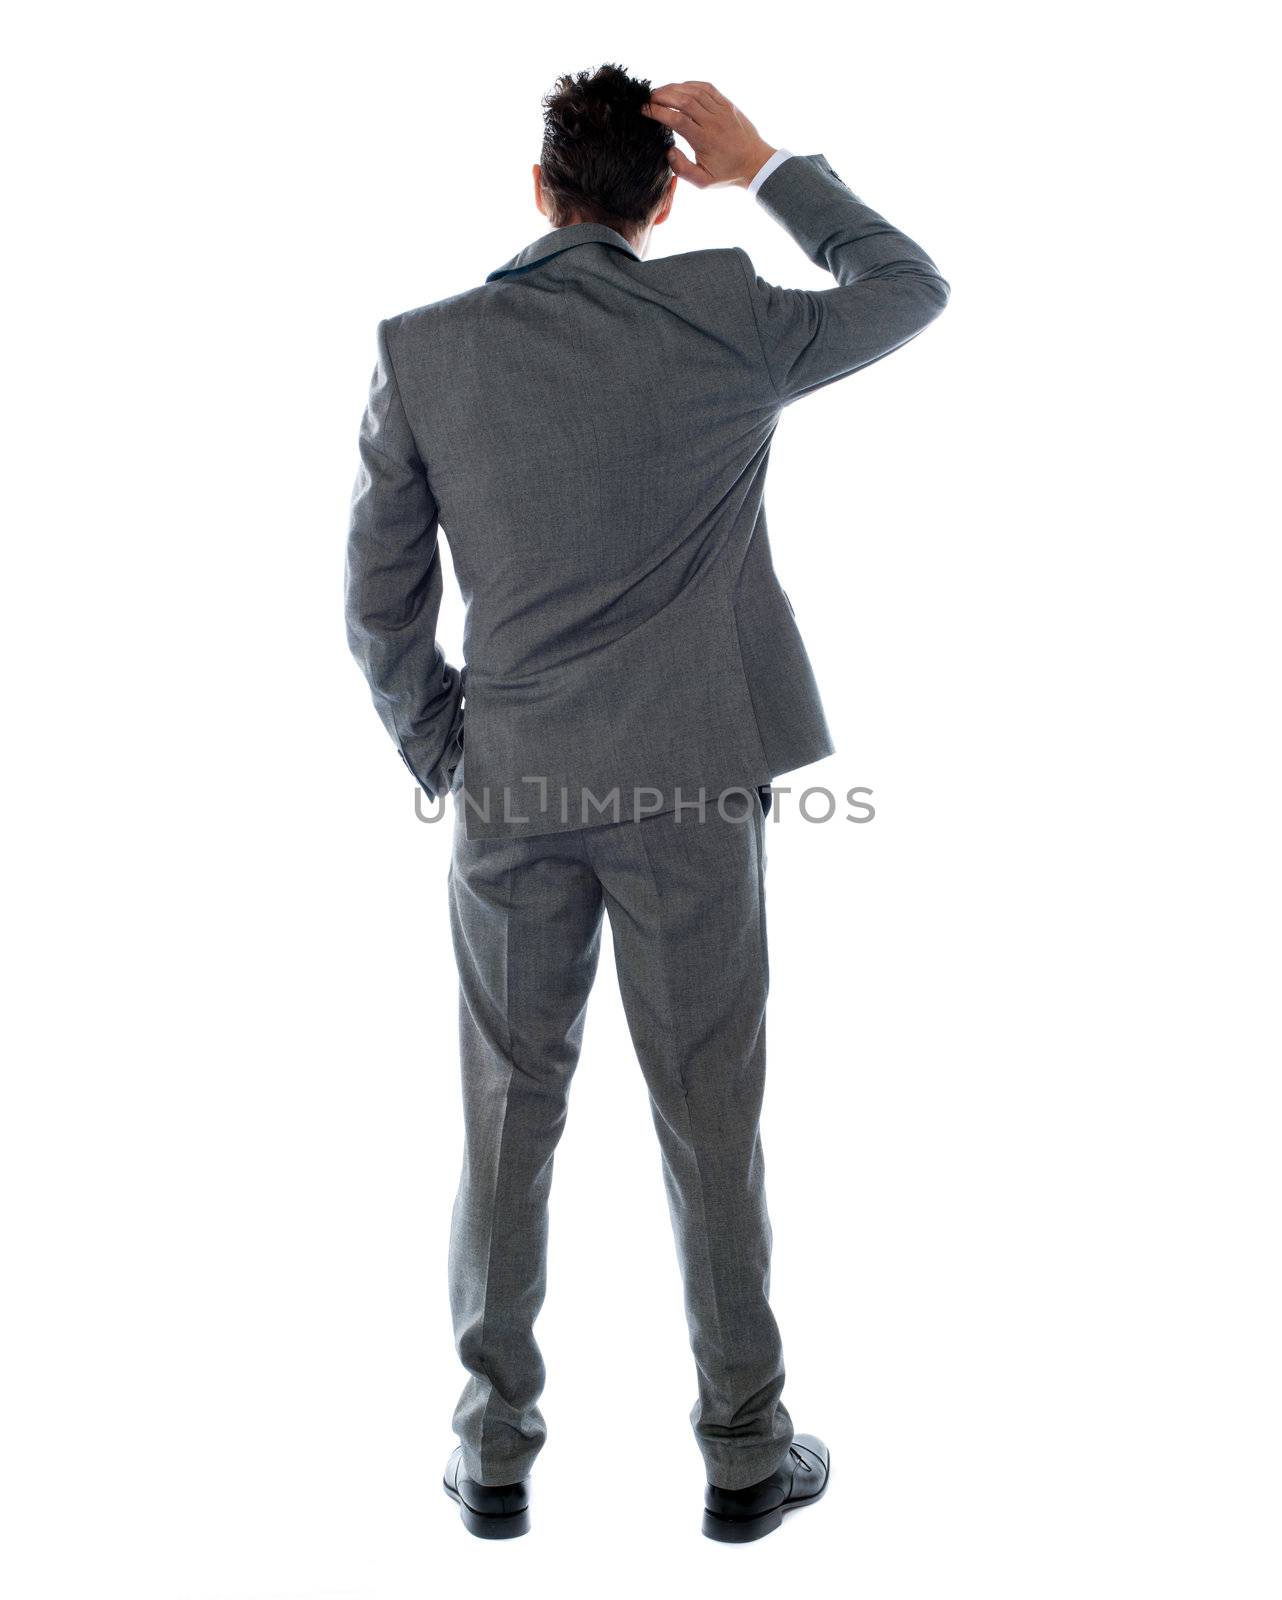 Back-pose of a corporate person thinking. Isolated over white background